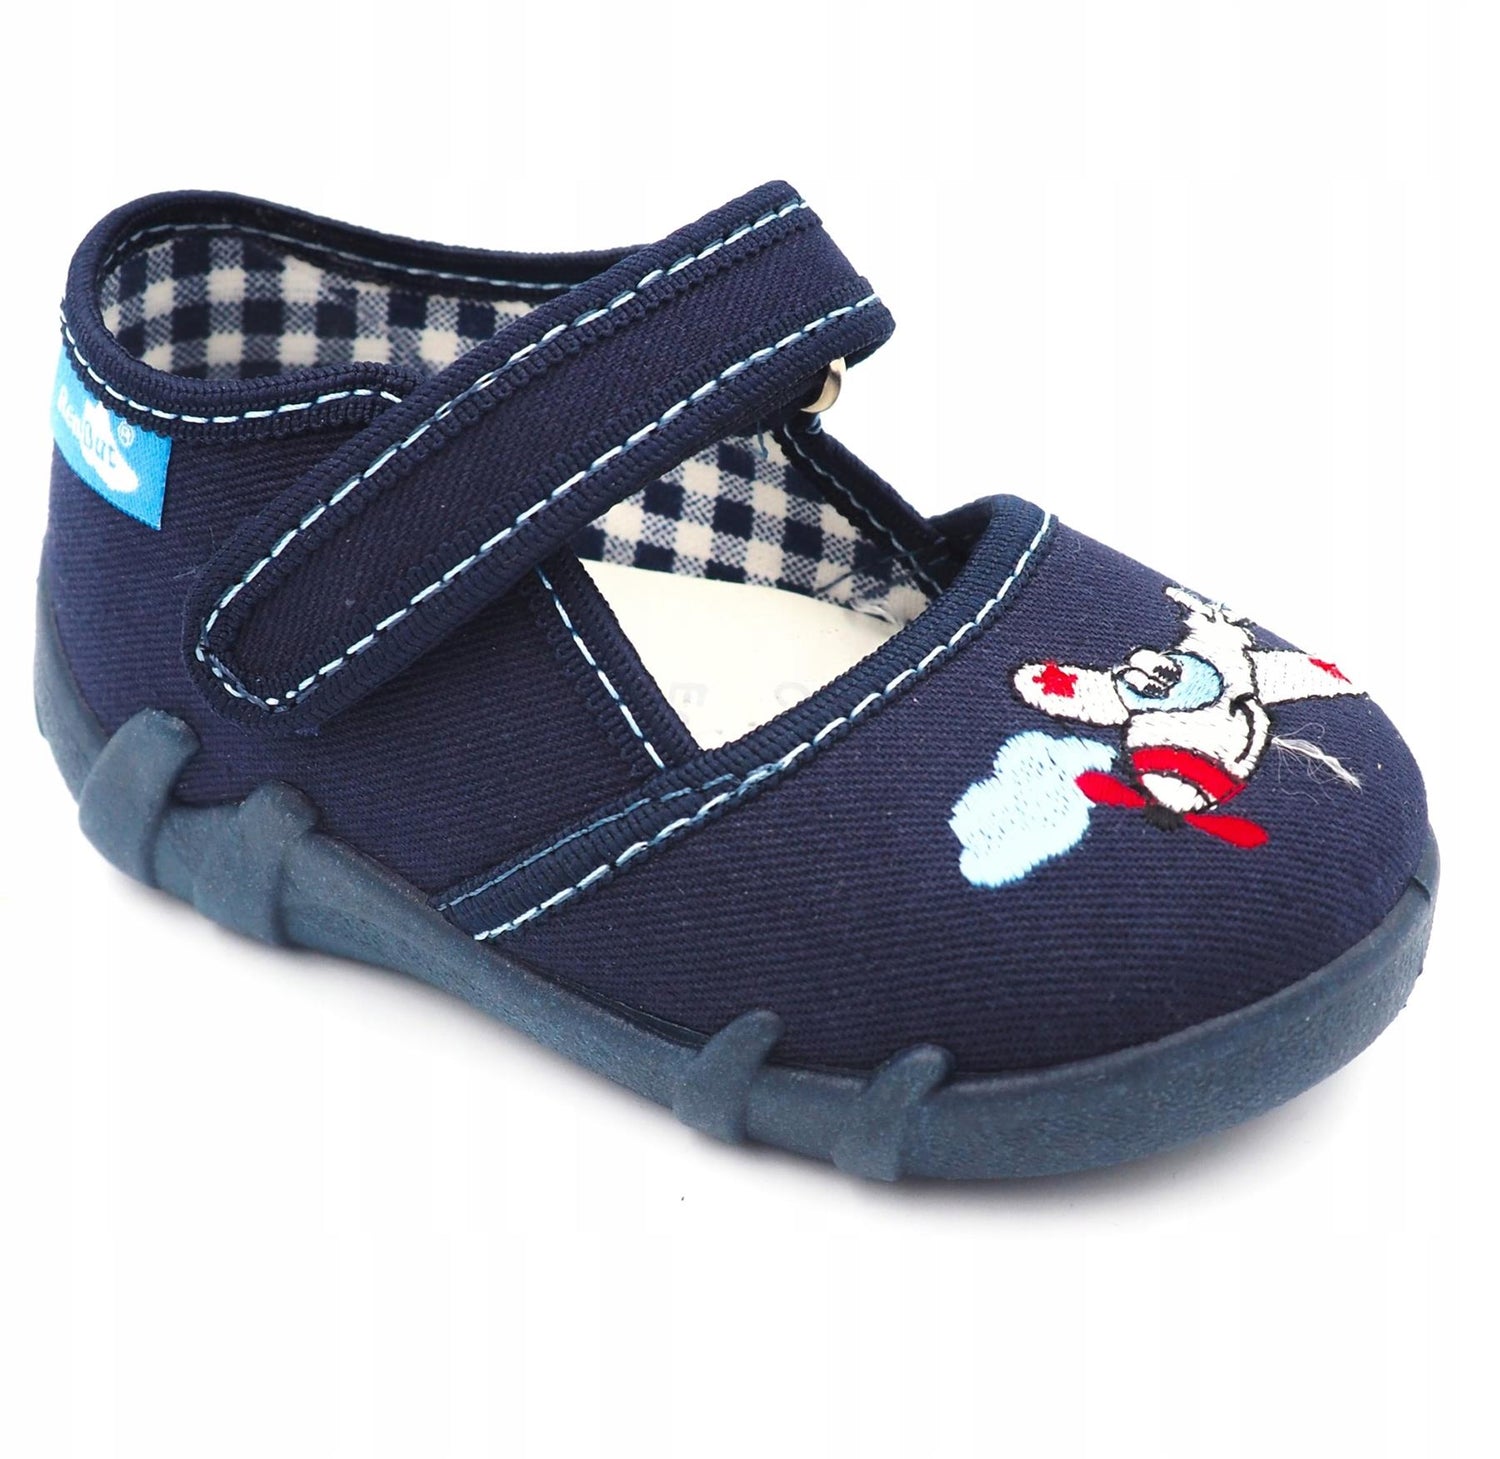 Boys Sandals Baby Children Kids Toddler Infant Casual Canvas Shoes Fasten #12